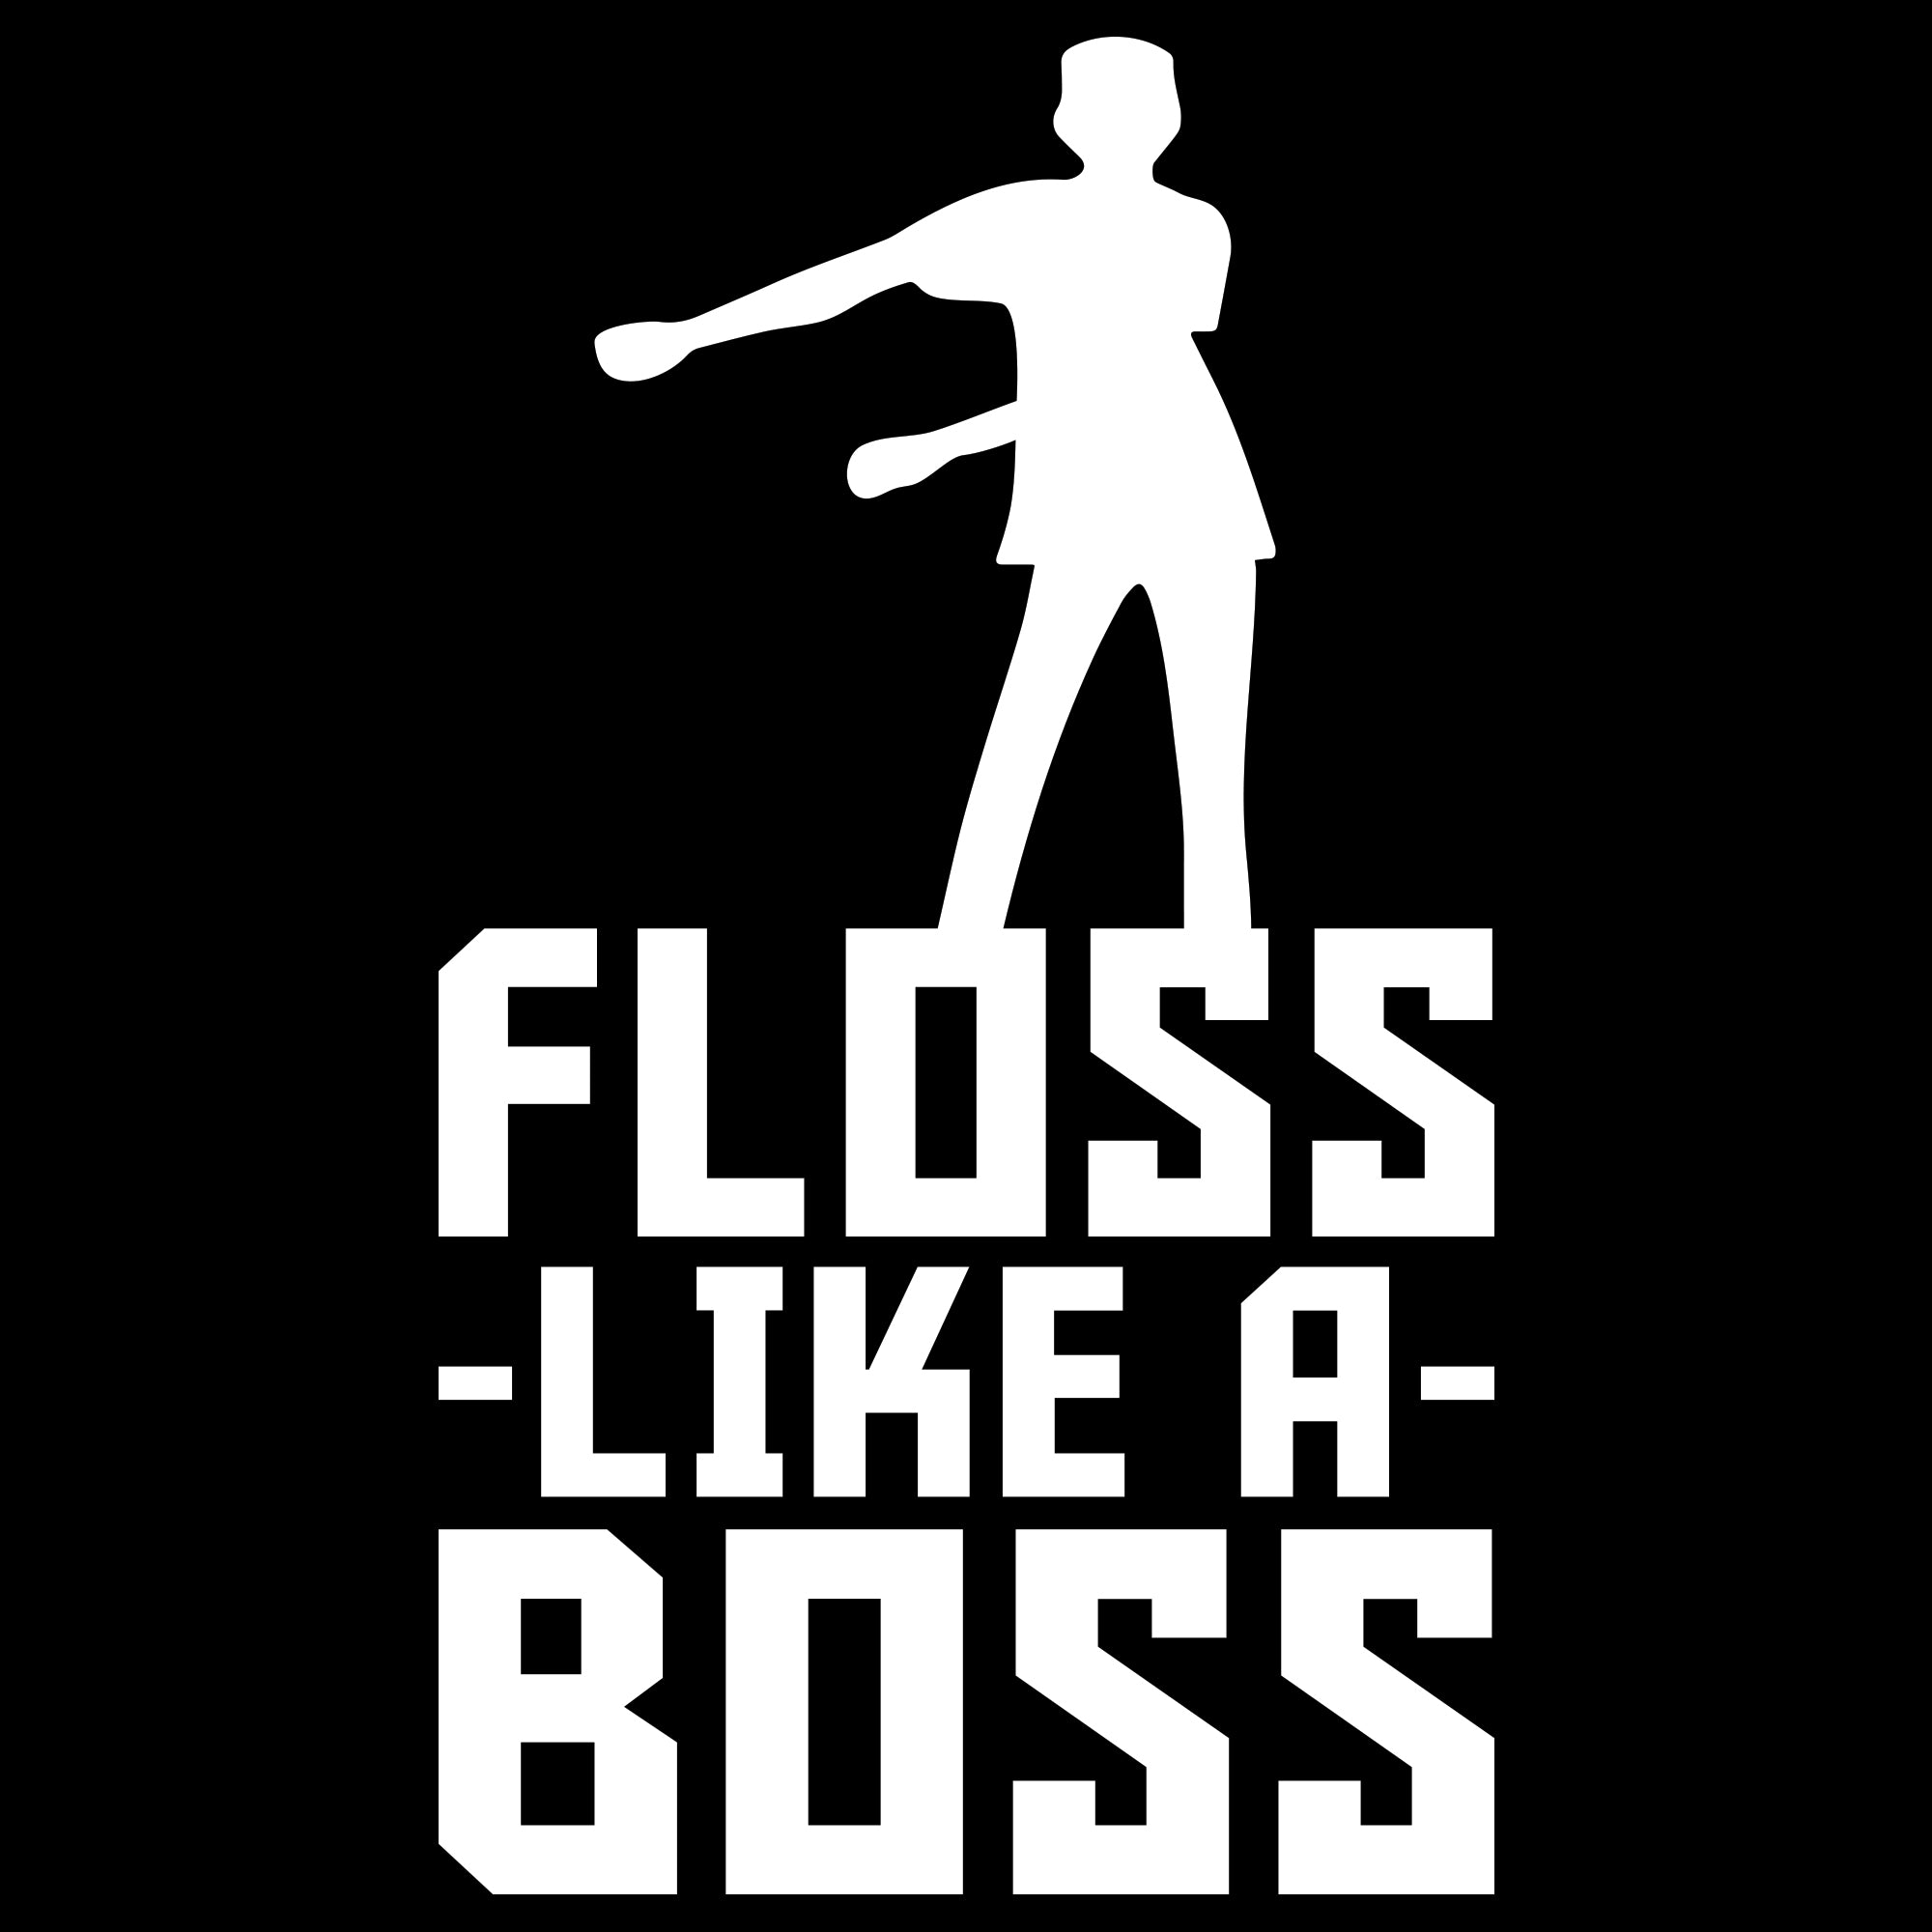 Floss Like A Boss - Flossin Dance Funny Emote Youth T Shirt